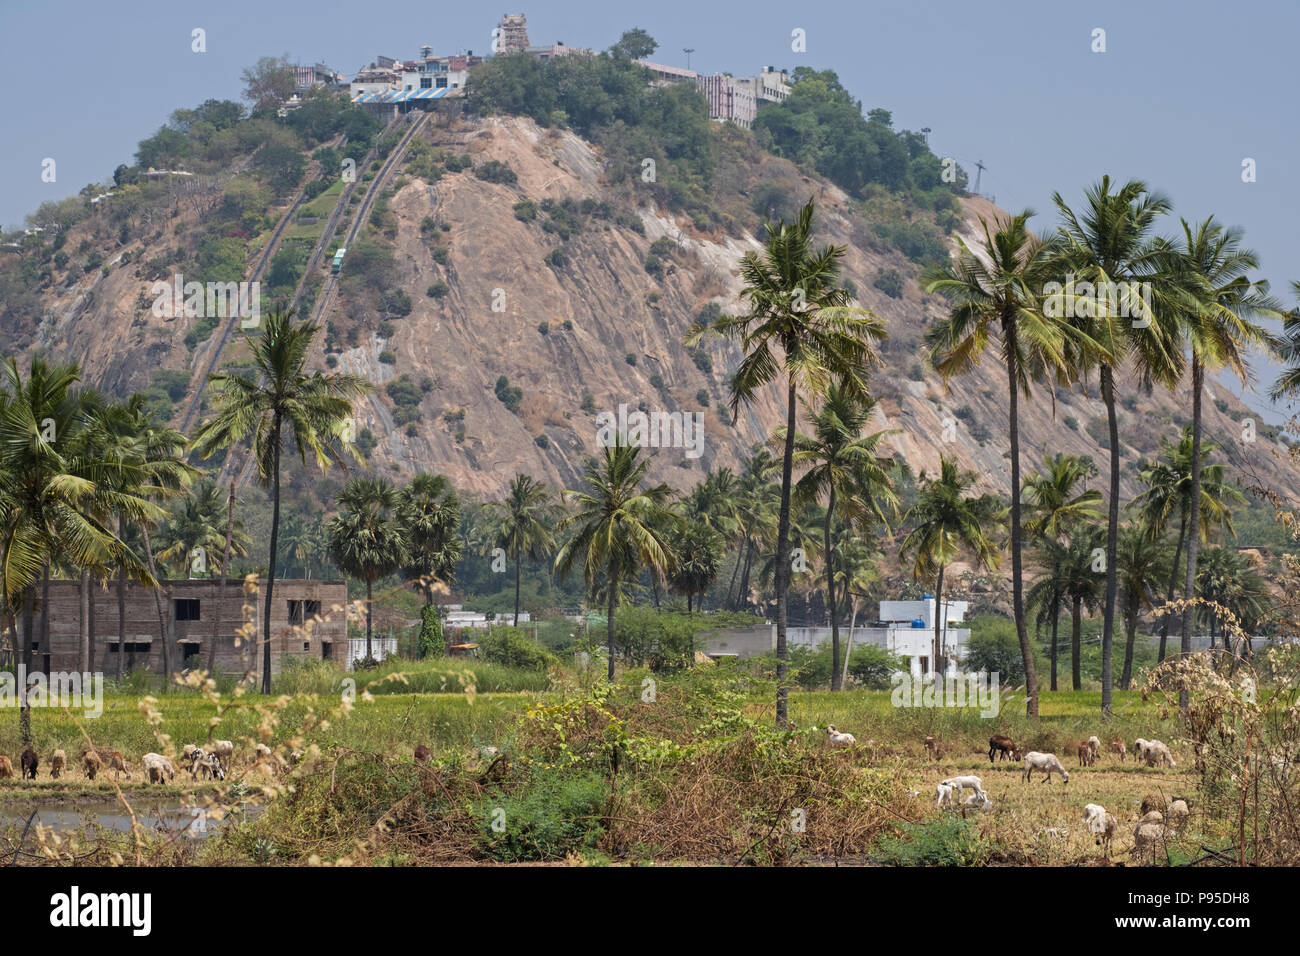 View of the Palani temple, famous throughout southern India and dedicated to the Hindu deity Murugan who is revered locally Stock Photo